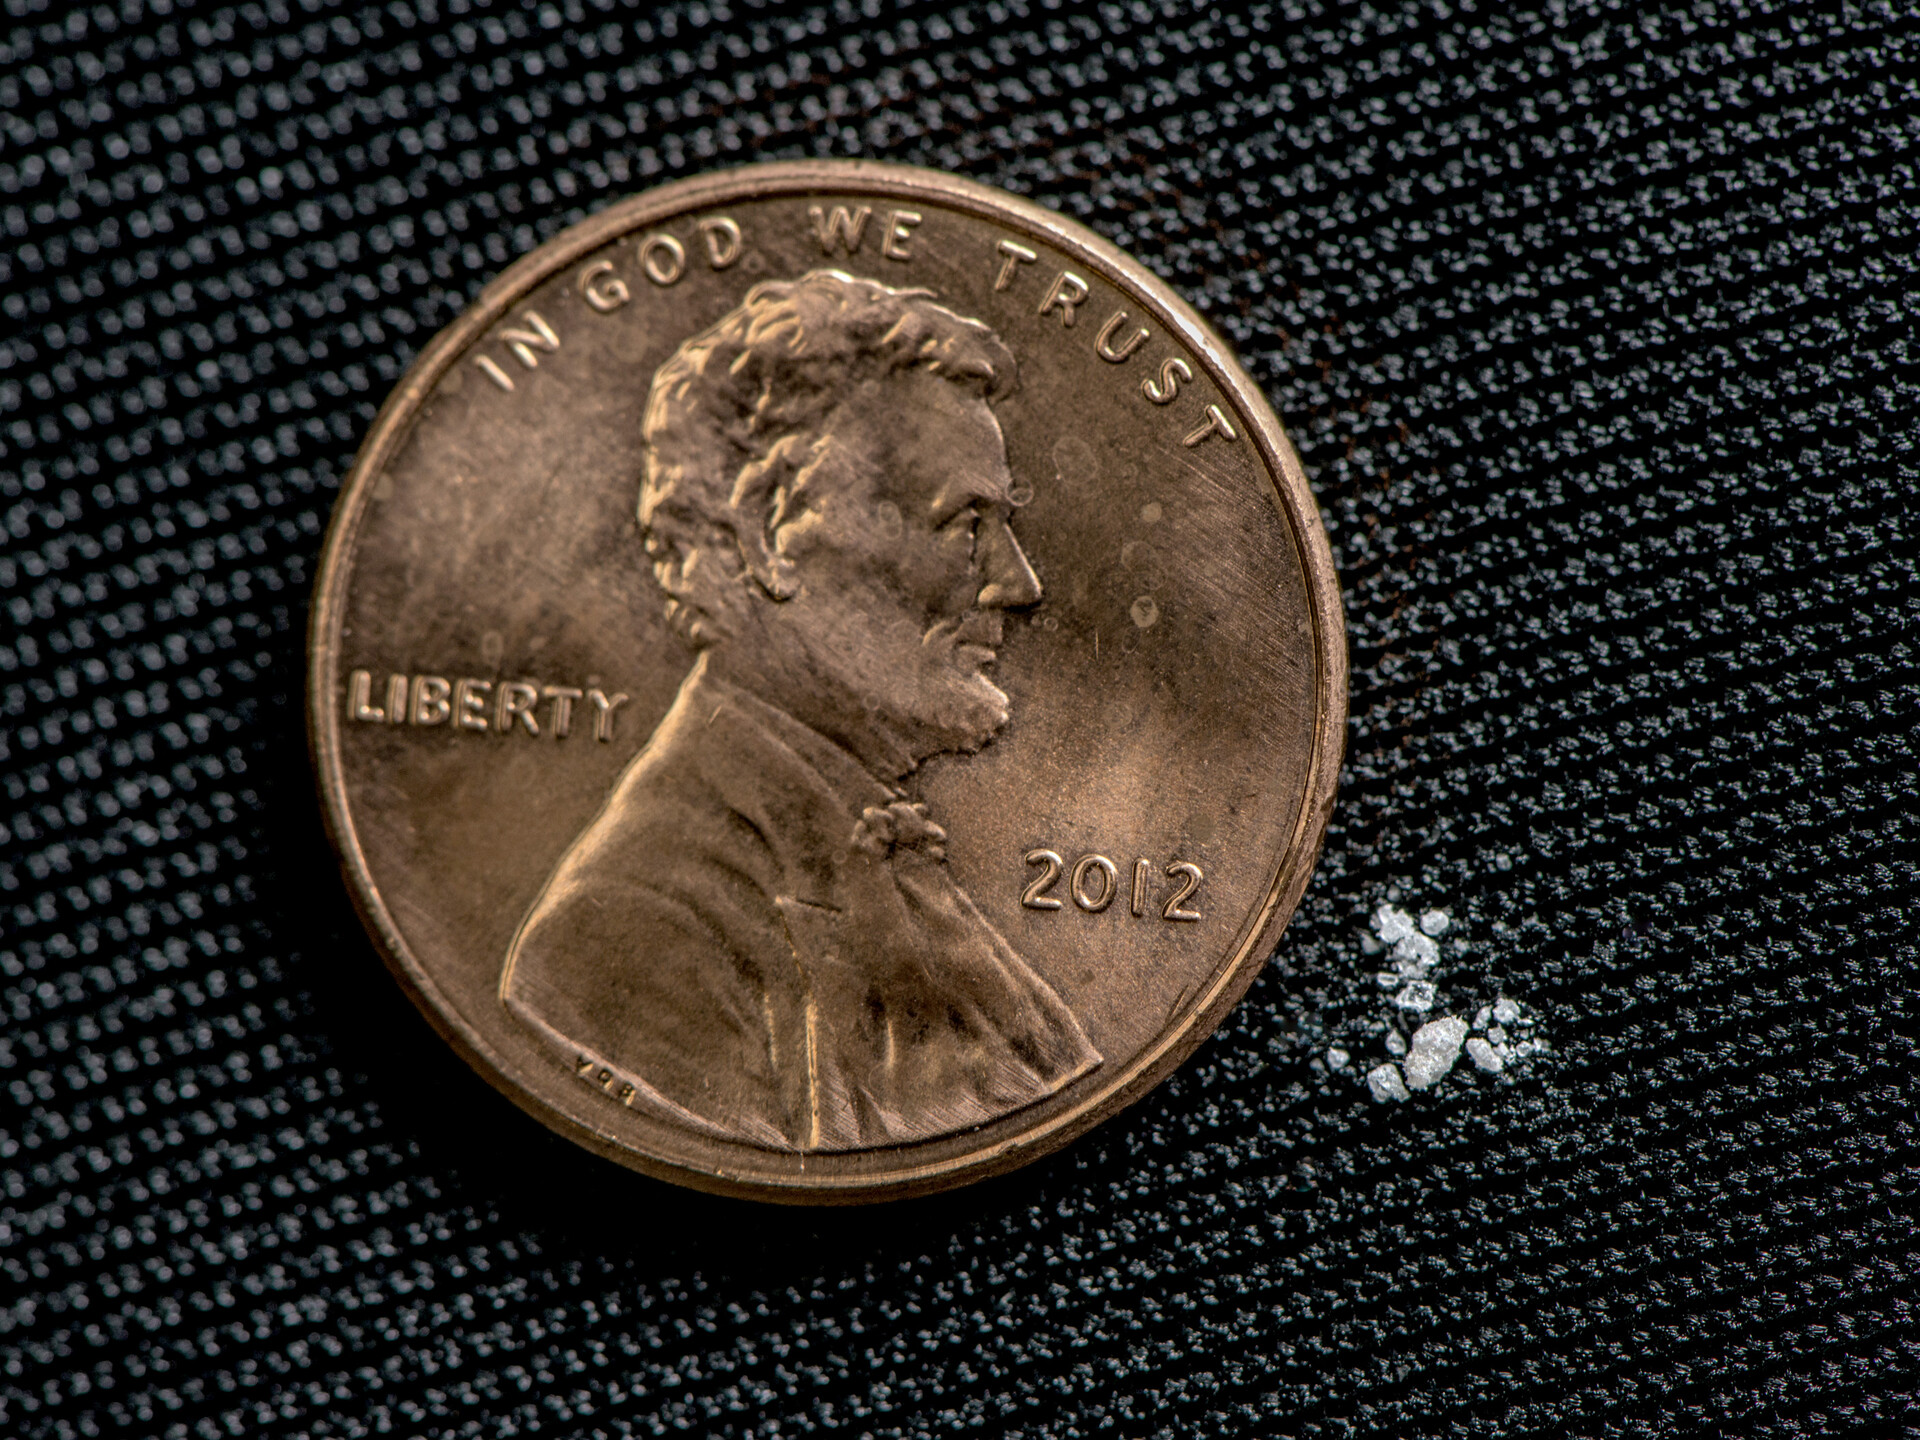 What Is Fentanyl and Why Is It So Dangerous? - WSJ